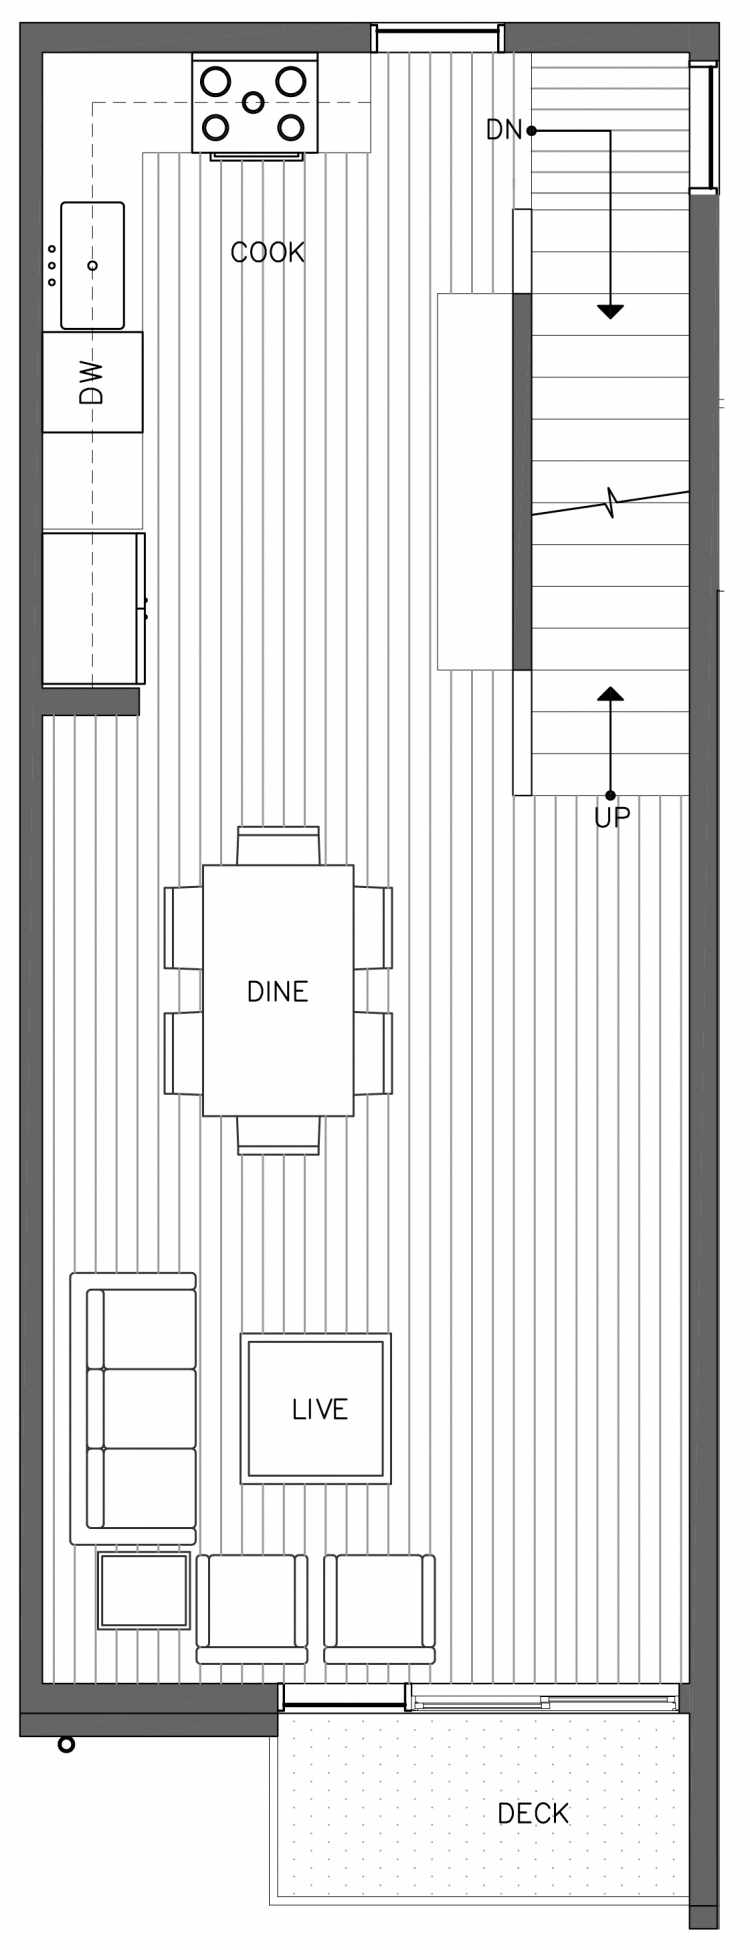 Second Floor Plan of 3236B 14th Ave W, One of the Harloe Townhomes in North Queen Anne by Isola Homes